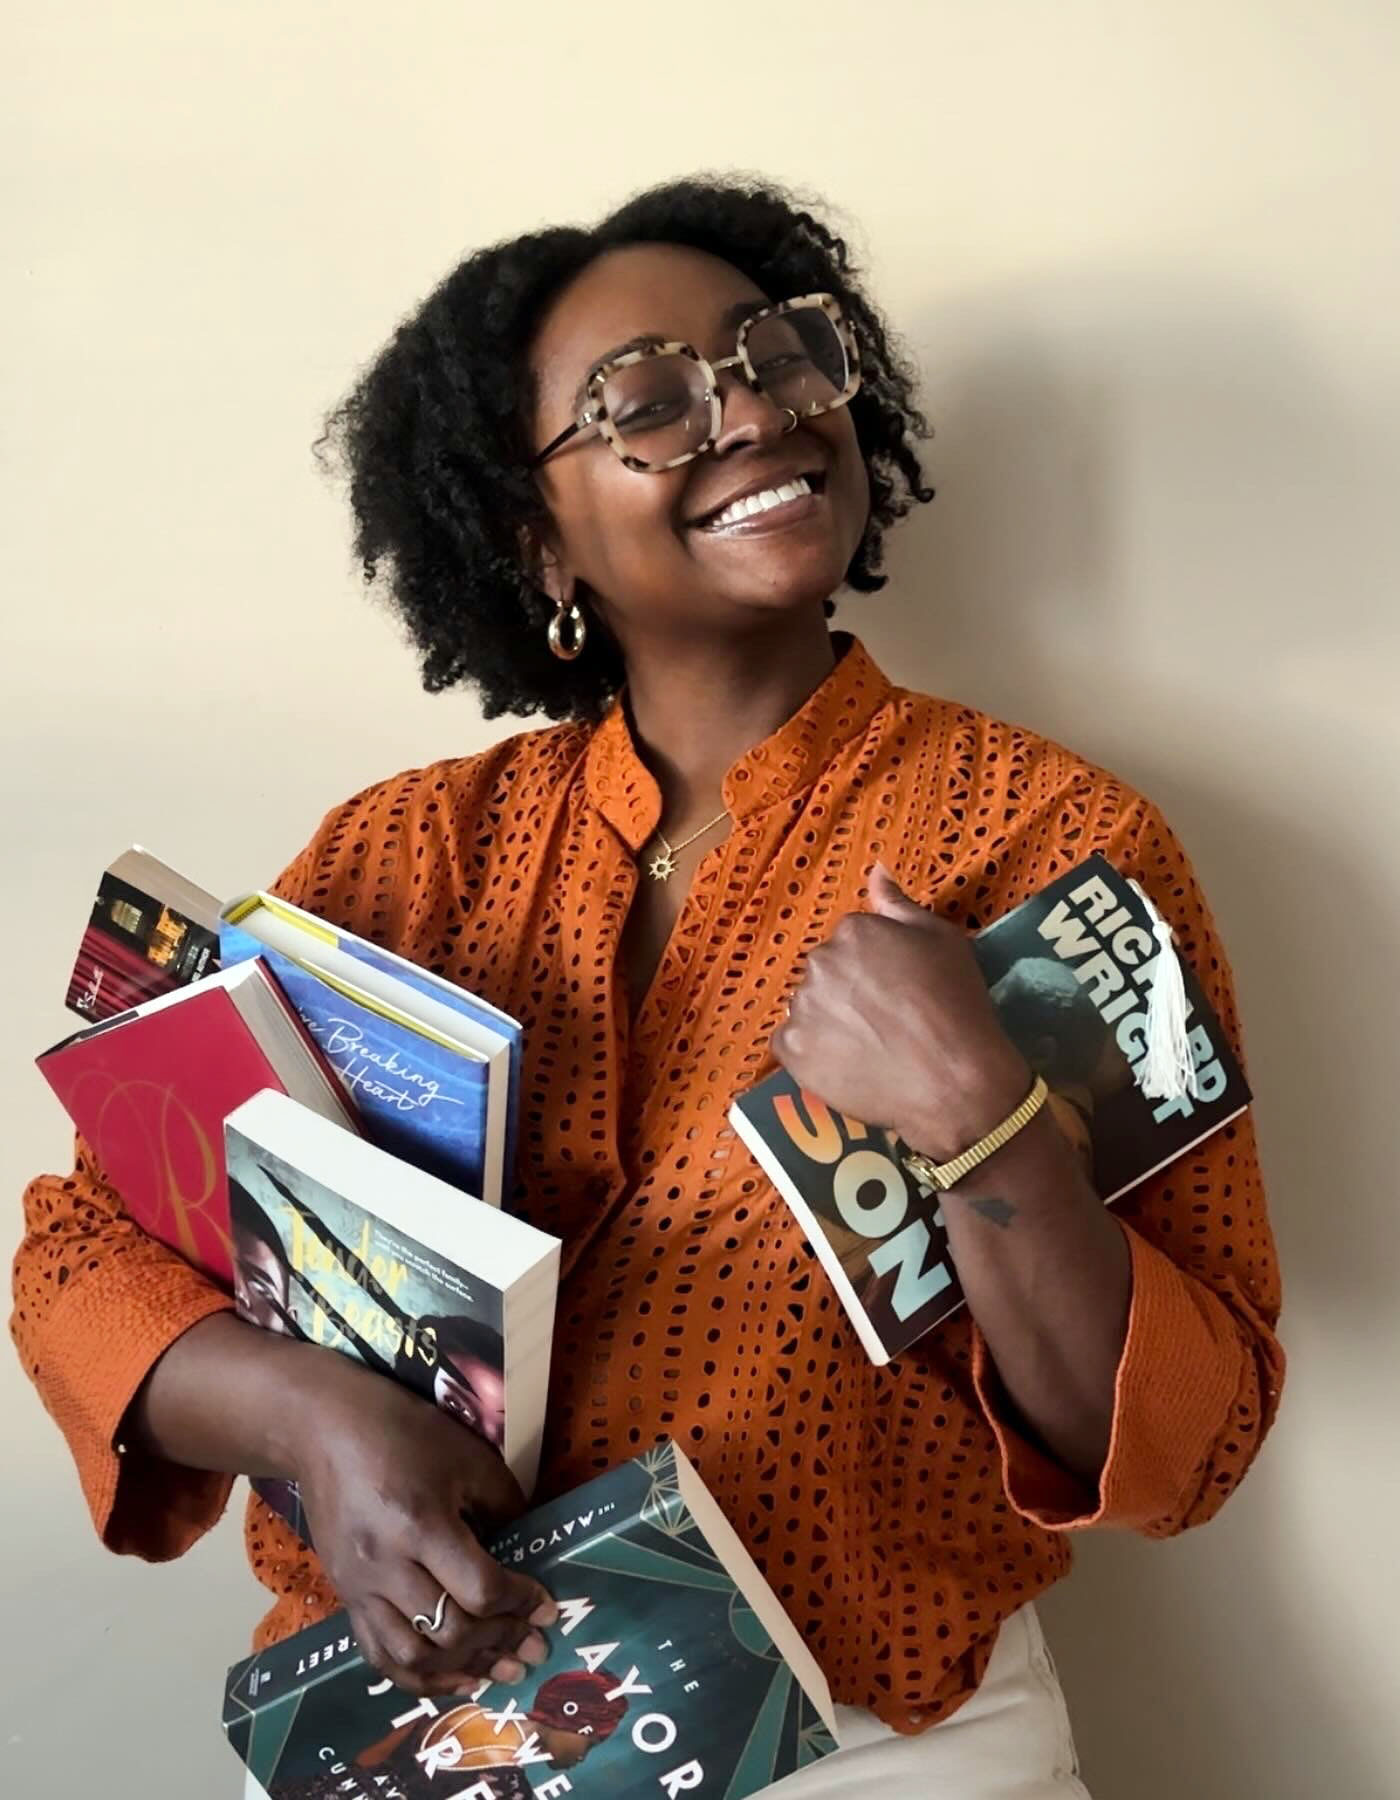 Portrait of Dawnshaeé Reid holding lots of different books while smiling.